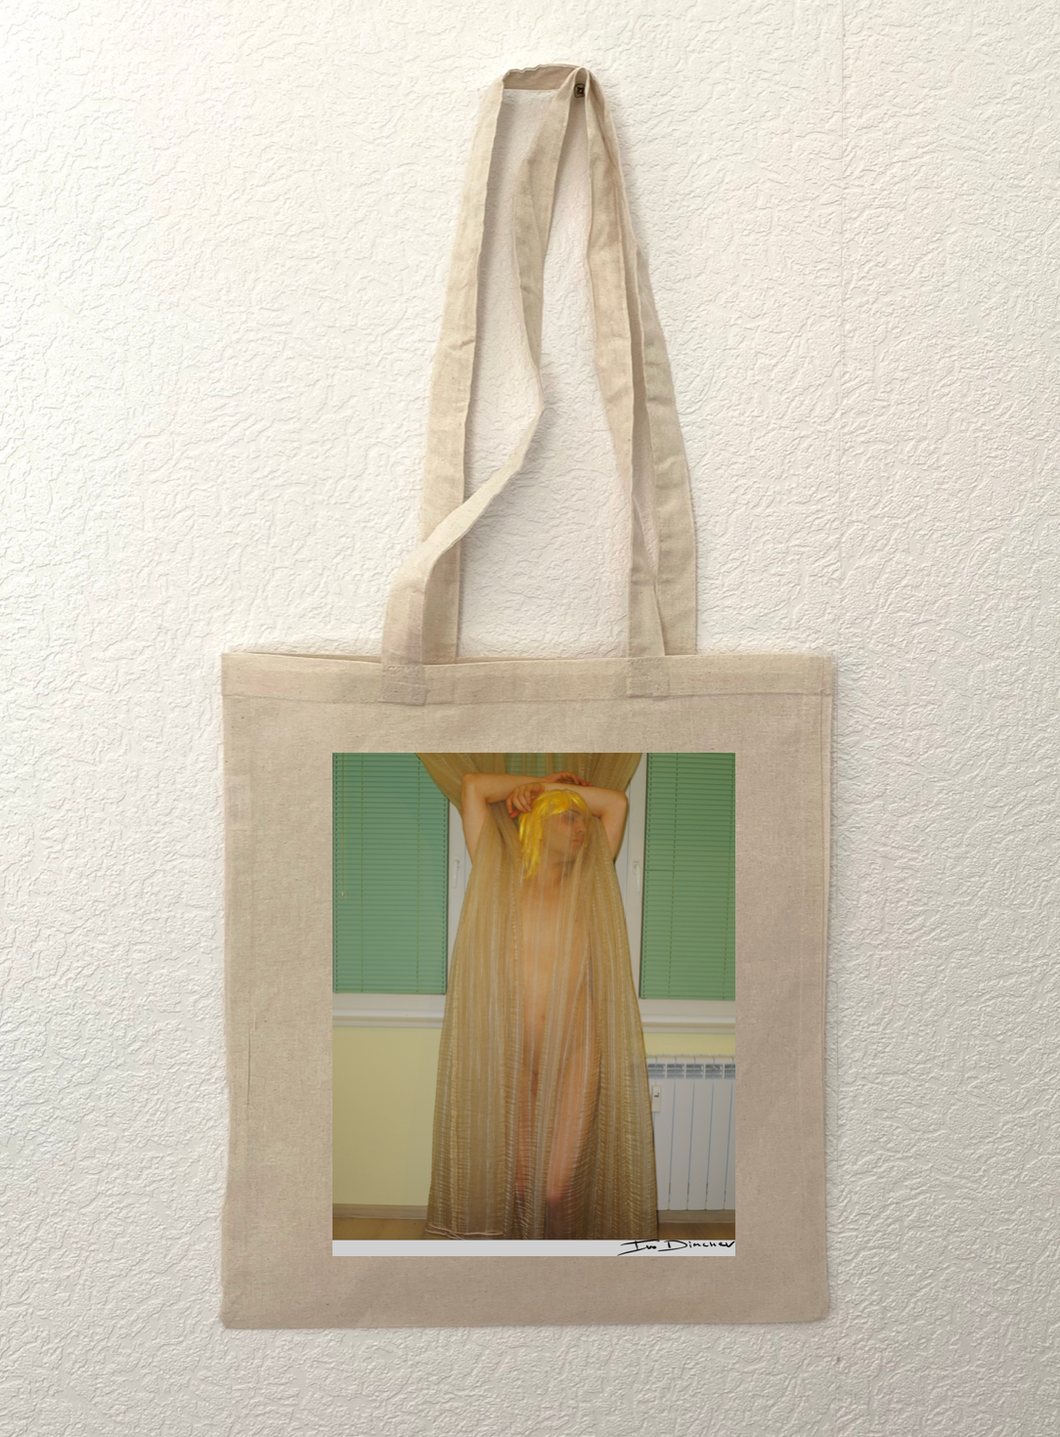 Eco bag by Ivo Dimchev